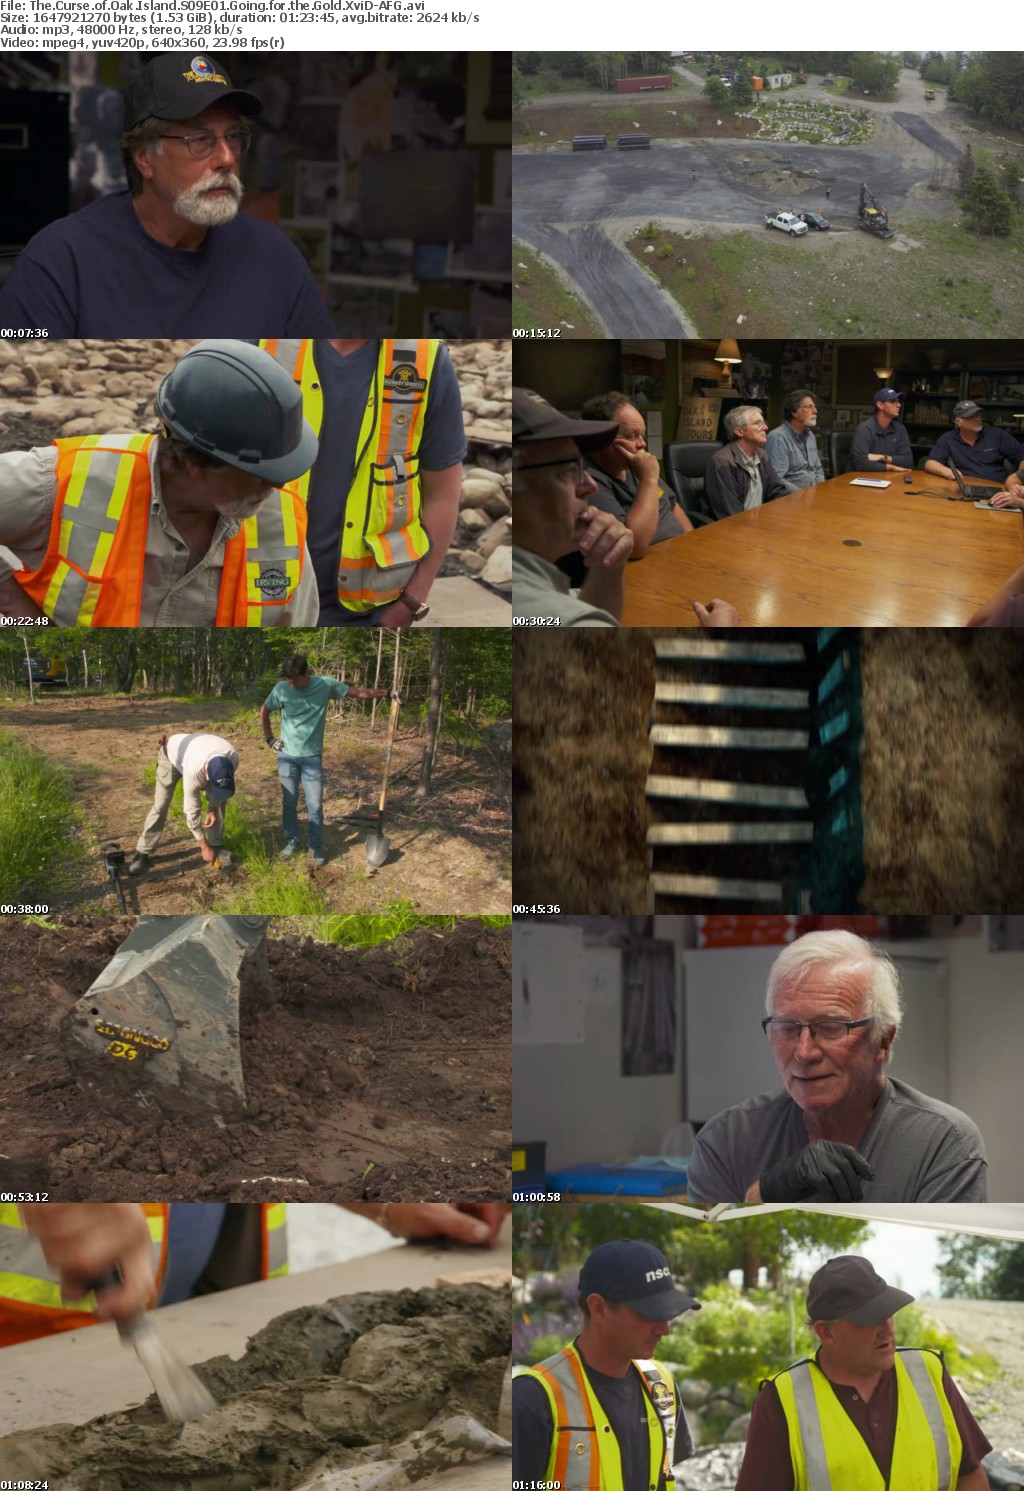 The Curse of Oak Island S09E01 Going for the Gold XviD-AFG